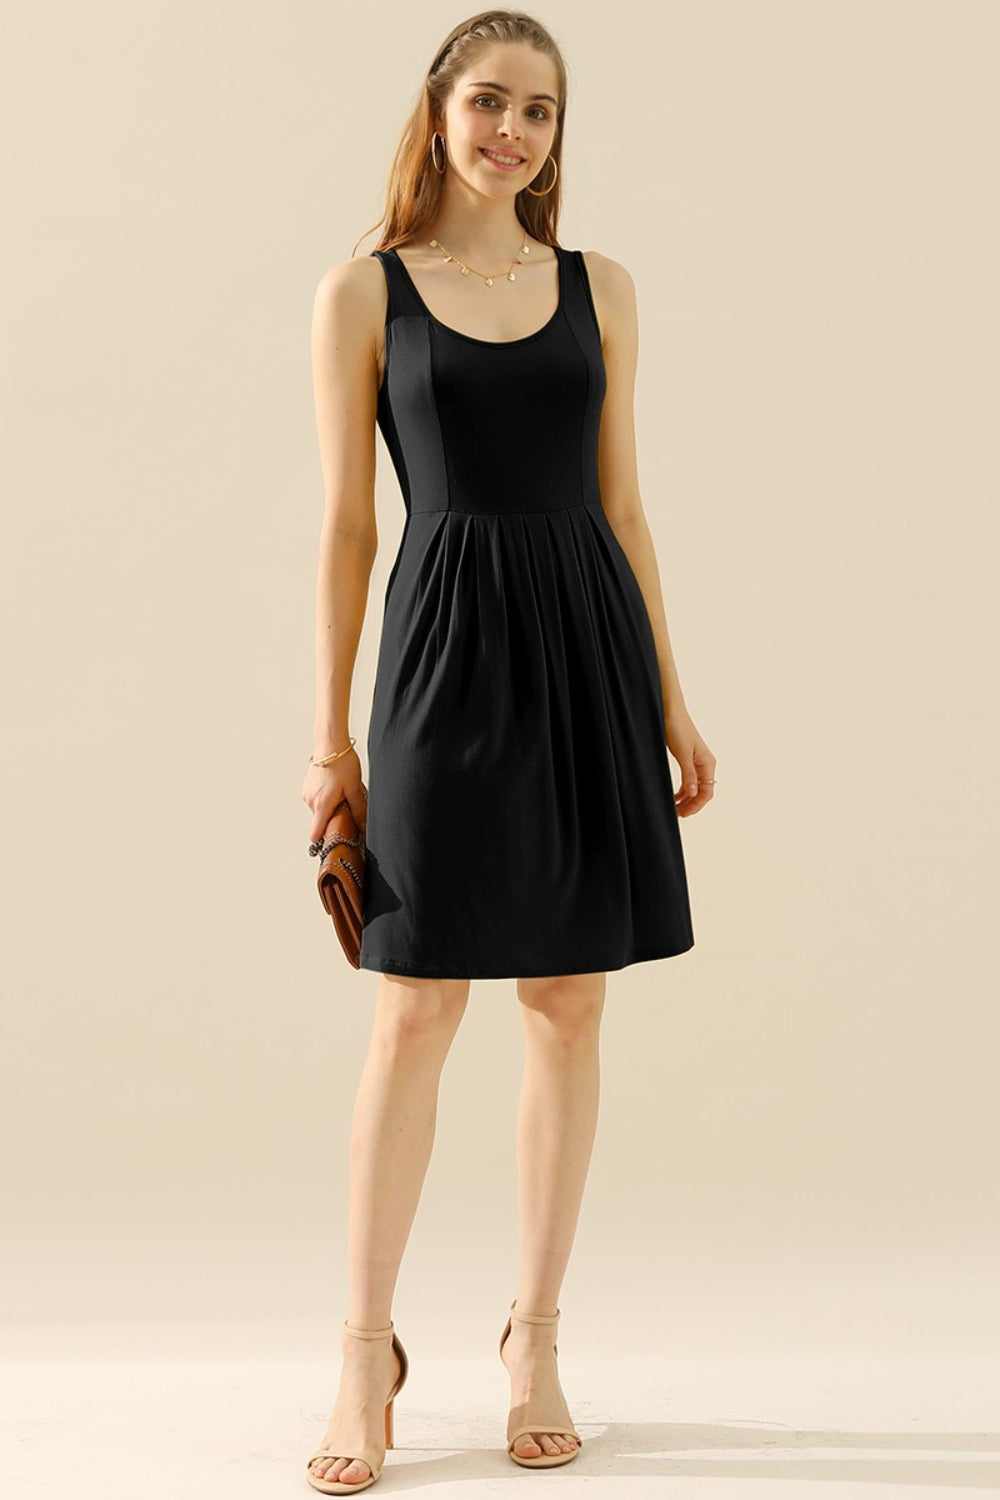 Elegant Sleeveless Ruched Dress with Pockets for Women - Perfect for Beach Weddings and Formal Events